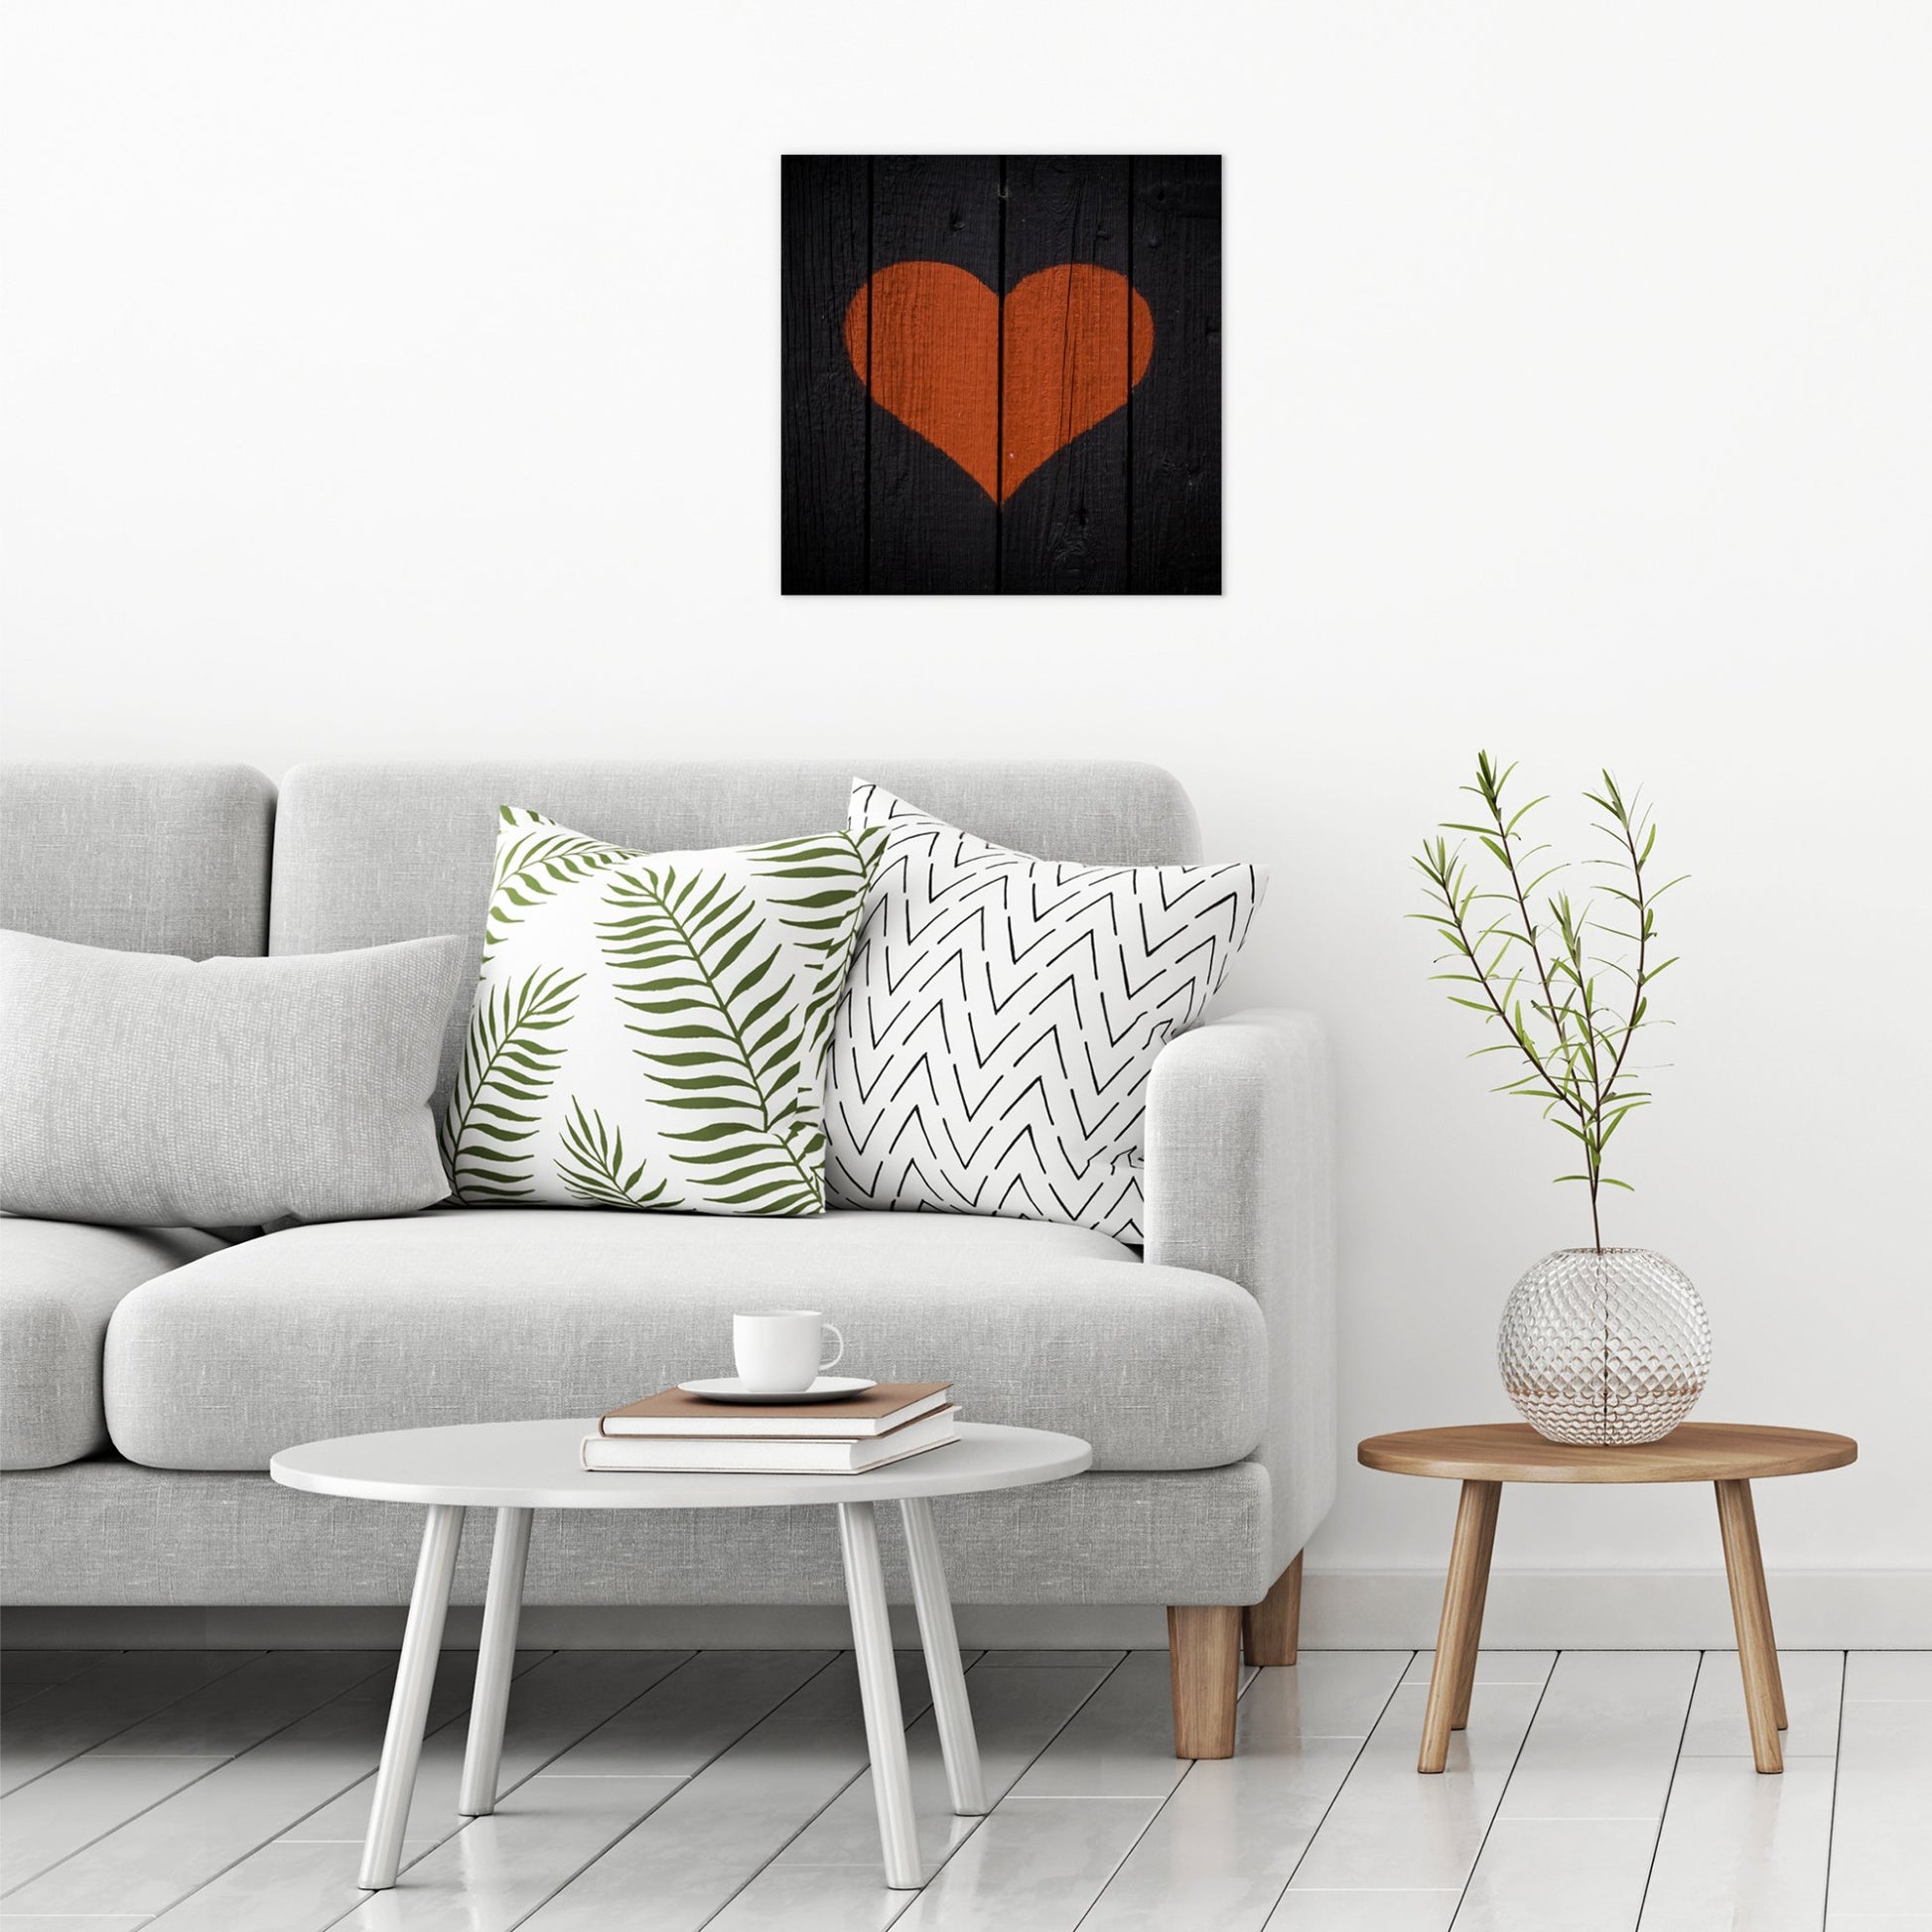 A contemporary modern room view showing a large size metal art poster display plate with printed design of a Painted Wooden Heart